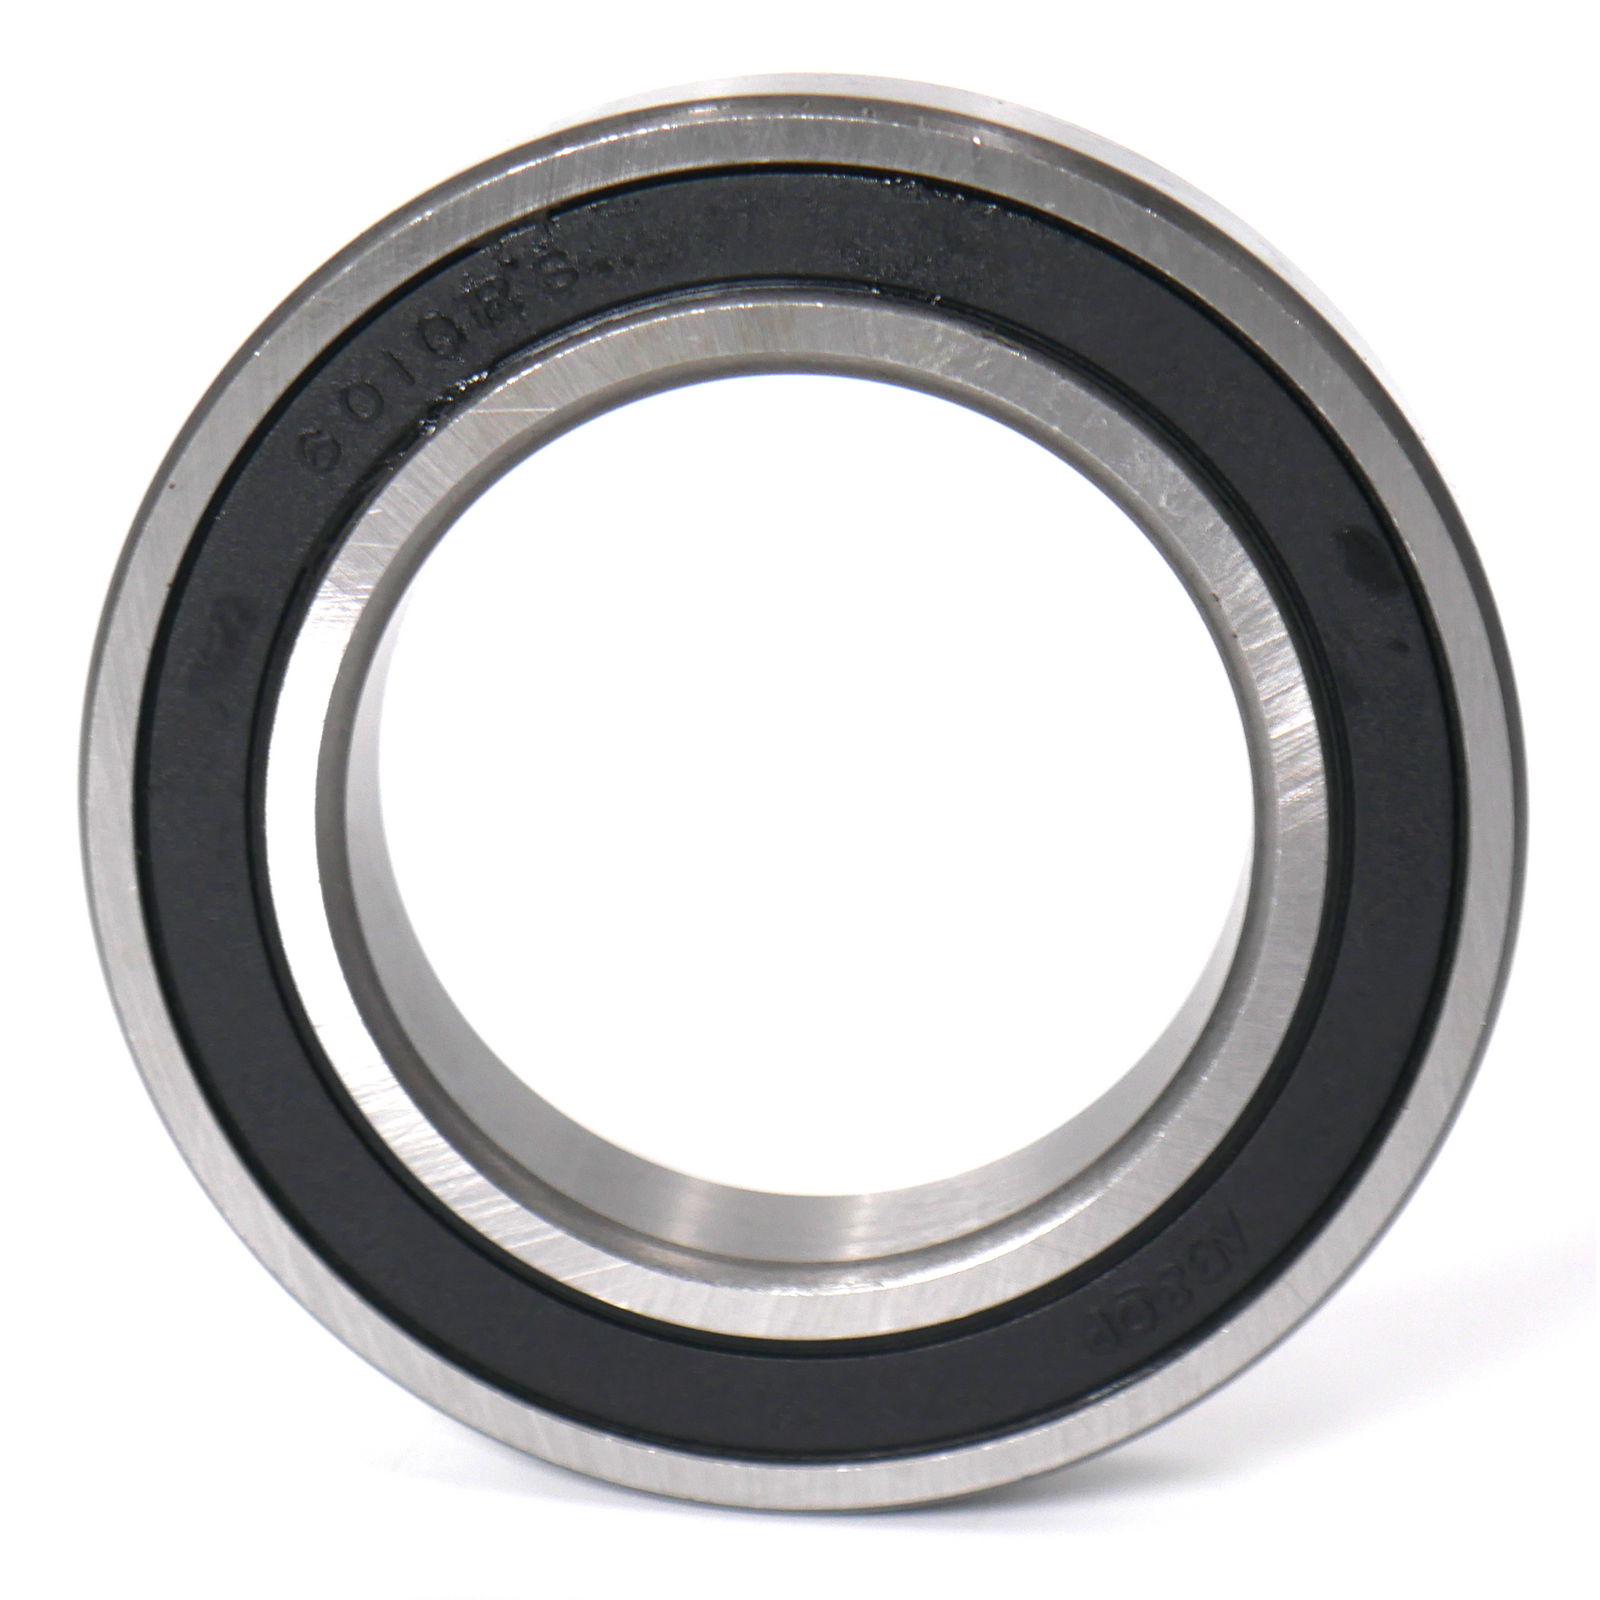 Bearing for auger fillers